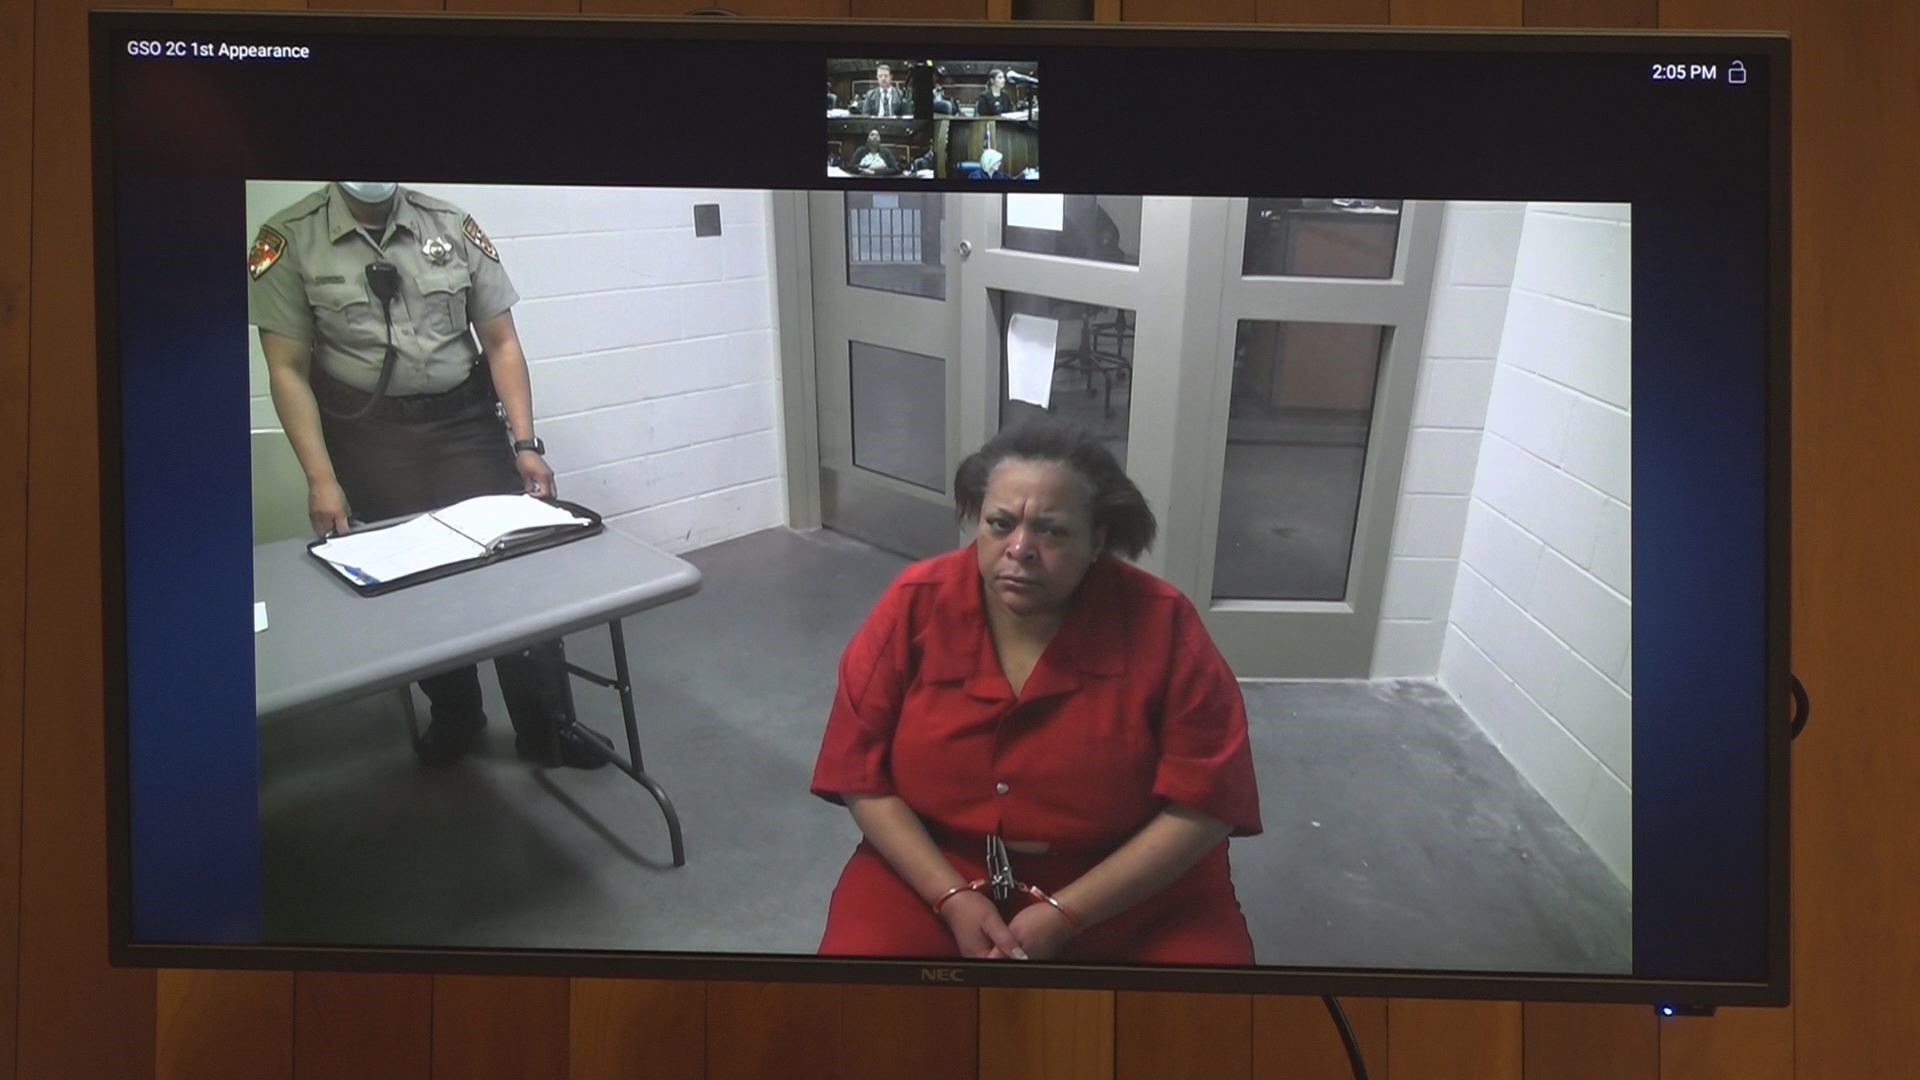 Grandmother Rubie Thomas is charged with the murder of her granddaughter 2-year-old Shade Wilhite. Disturbing details of the abuse came out in court.